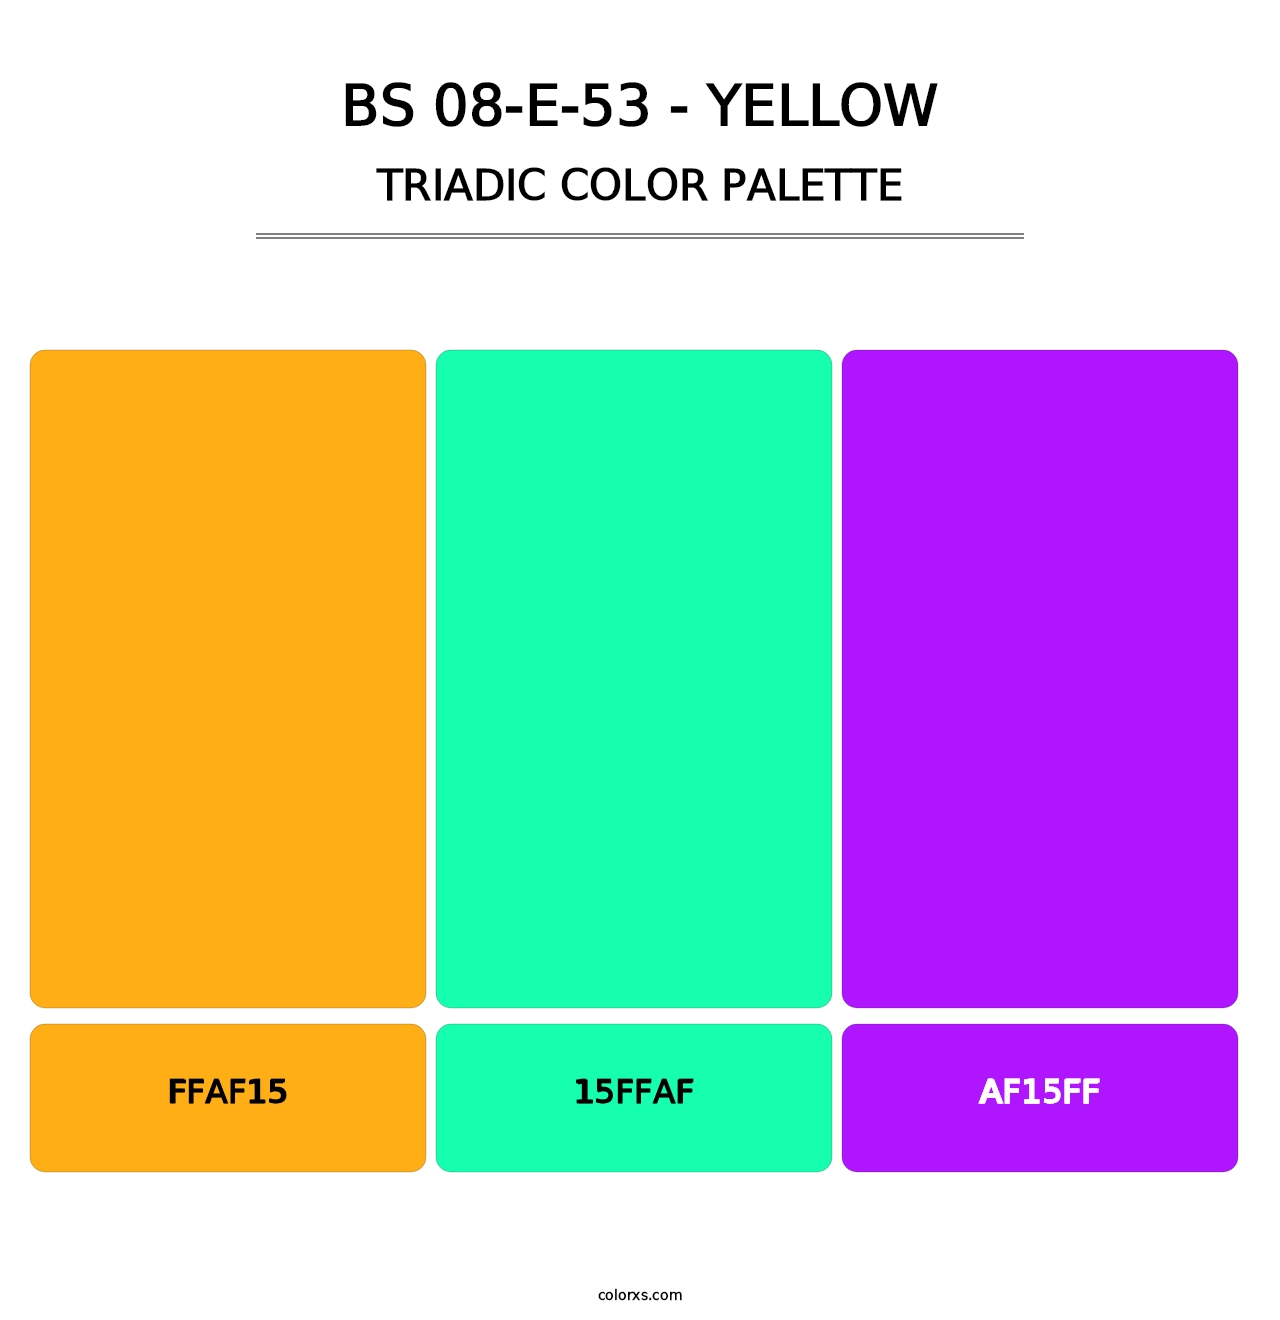 BS 08-E-53 - Yellow - Triadic Color Palette